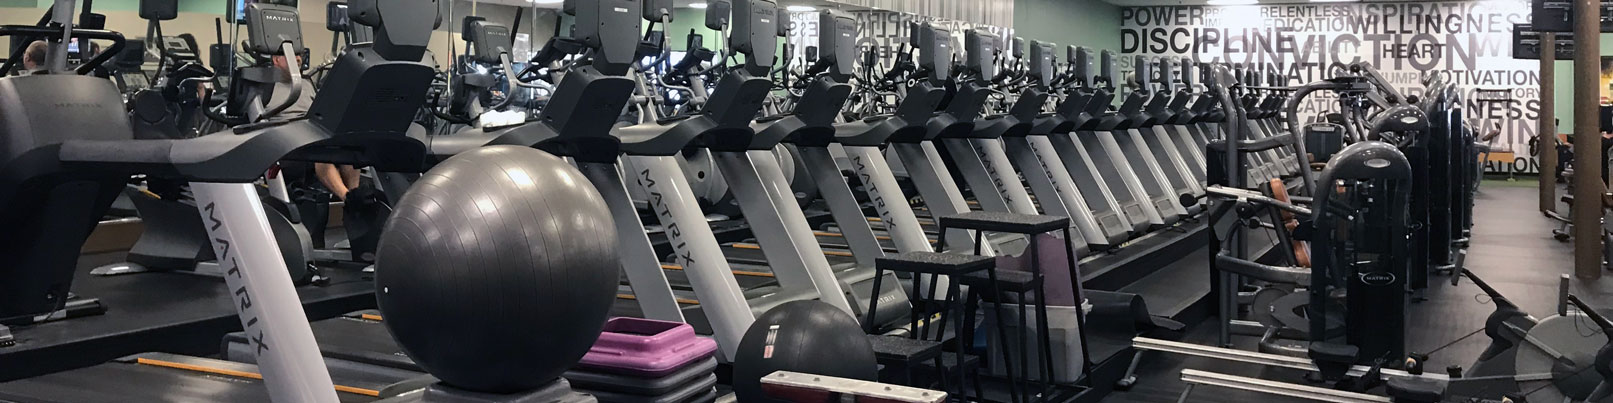 planet fitness locations in chapel hill